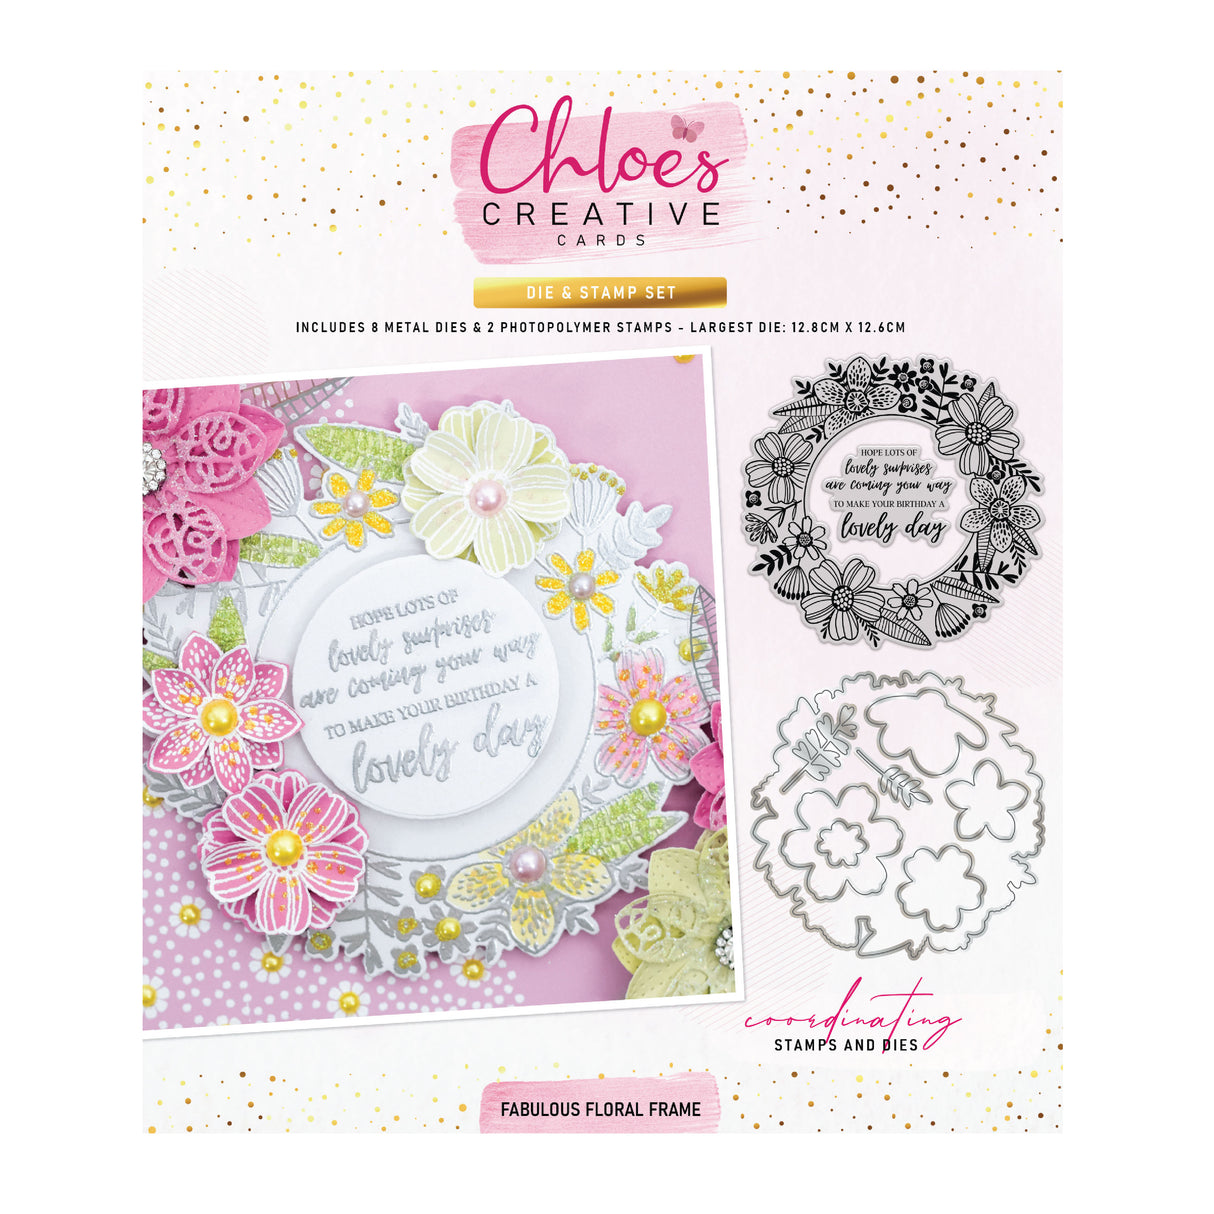 Chloes Creative Cards Die & Stamp Set - Fabulous Floral Frame